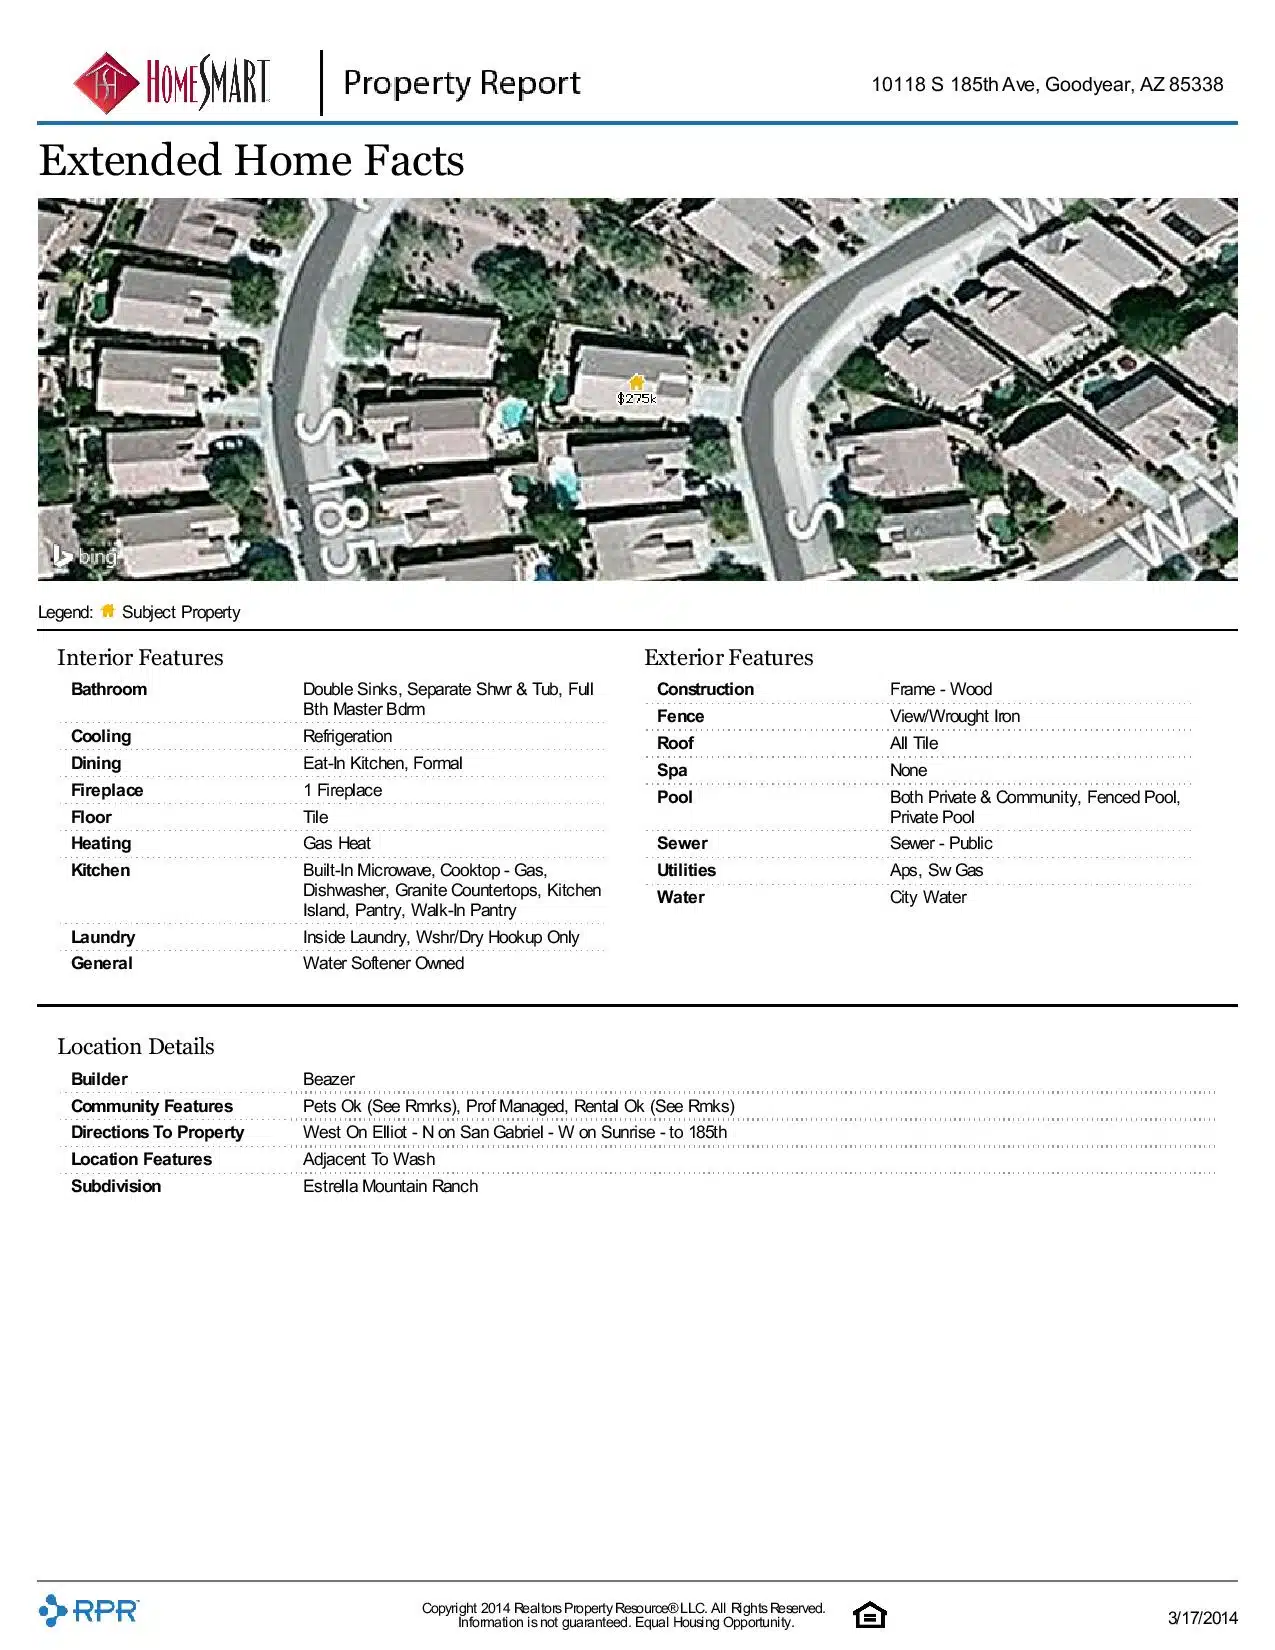 10118-S-185th-Ave-Goodyear-AZ-85338-page-004